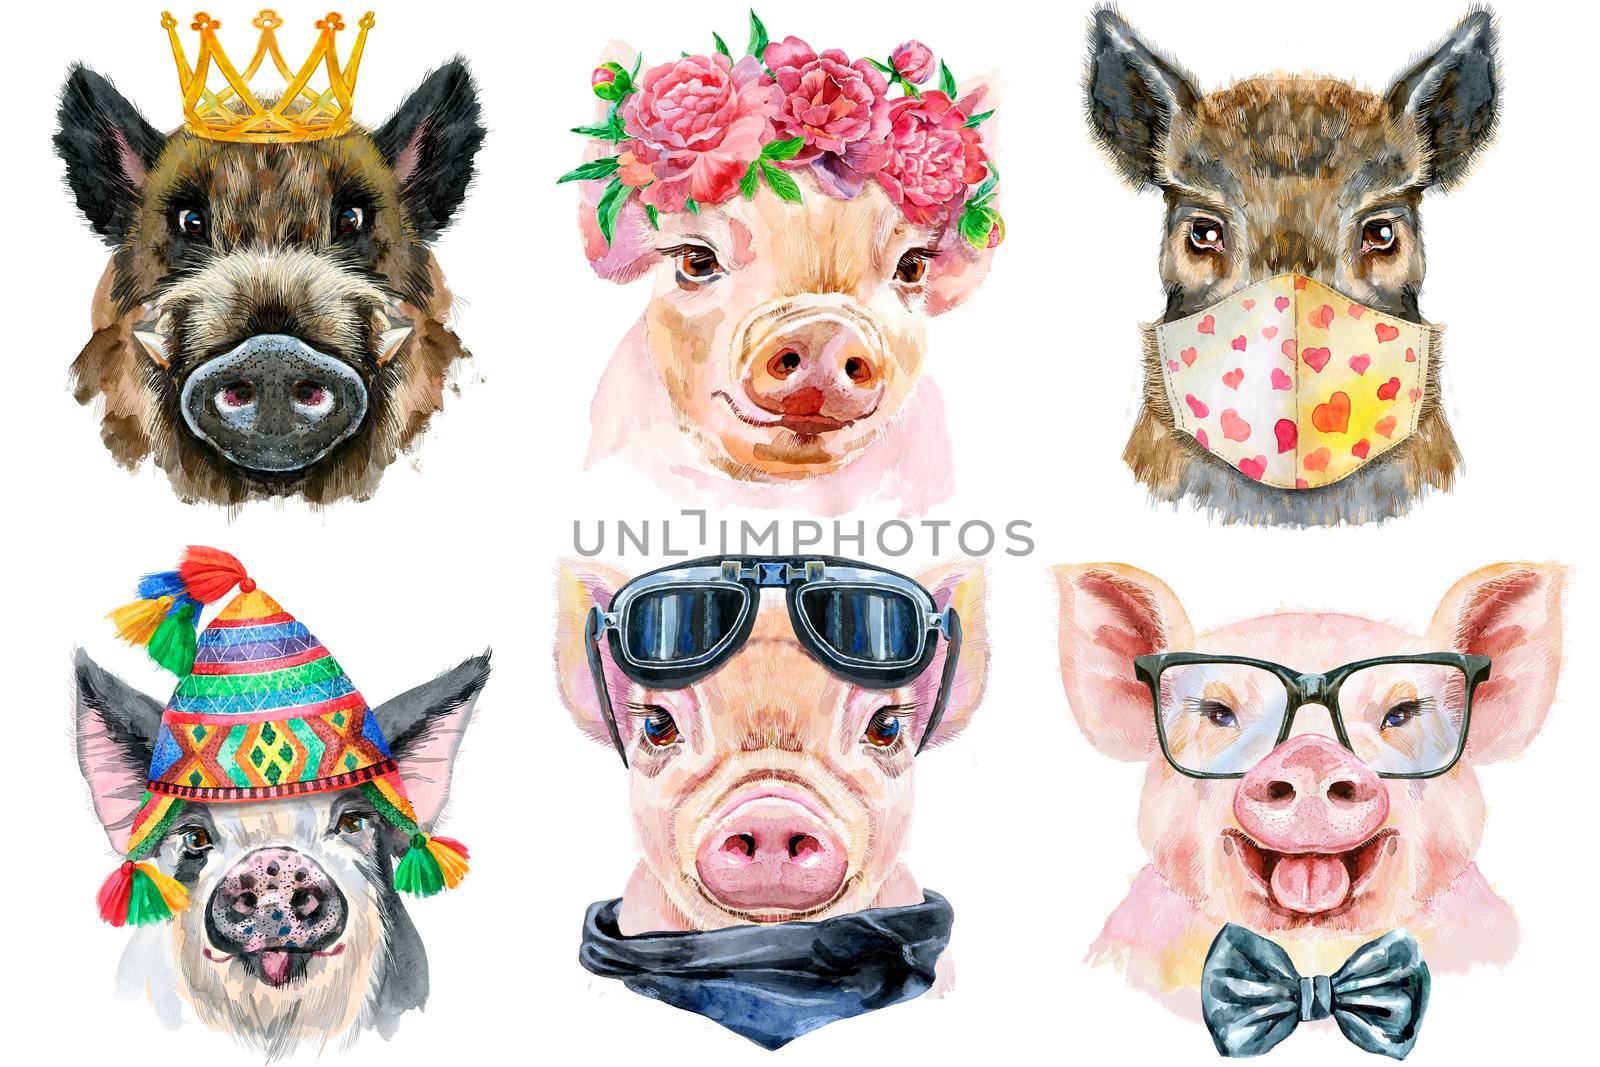 Watercolor illustration of tigers in wreath of peonies, chullo hat, medical protective mask, glasses and golden crown